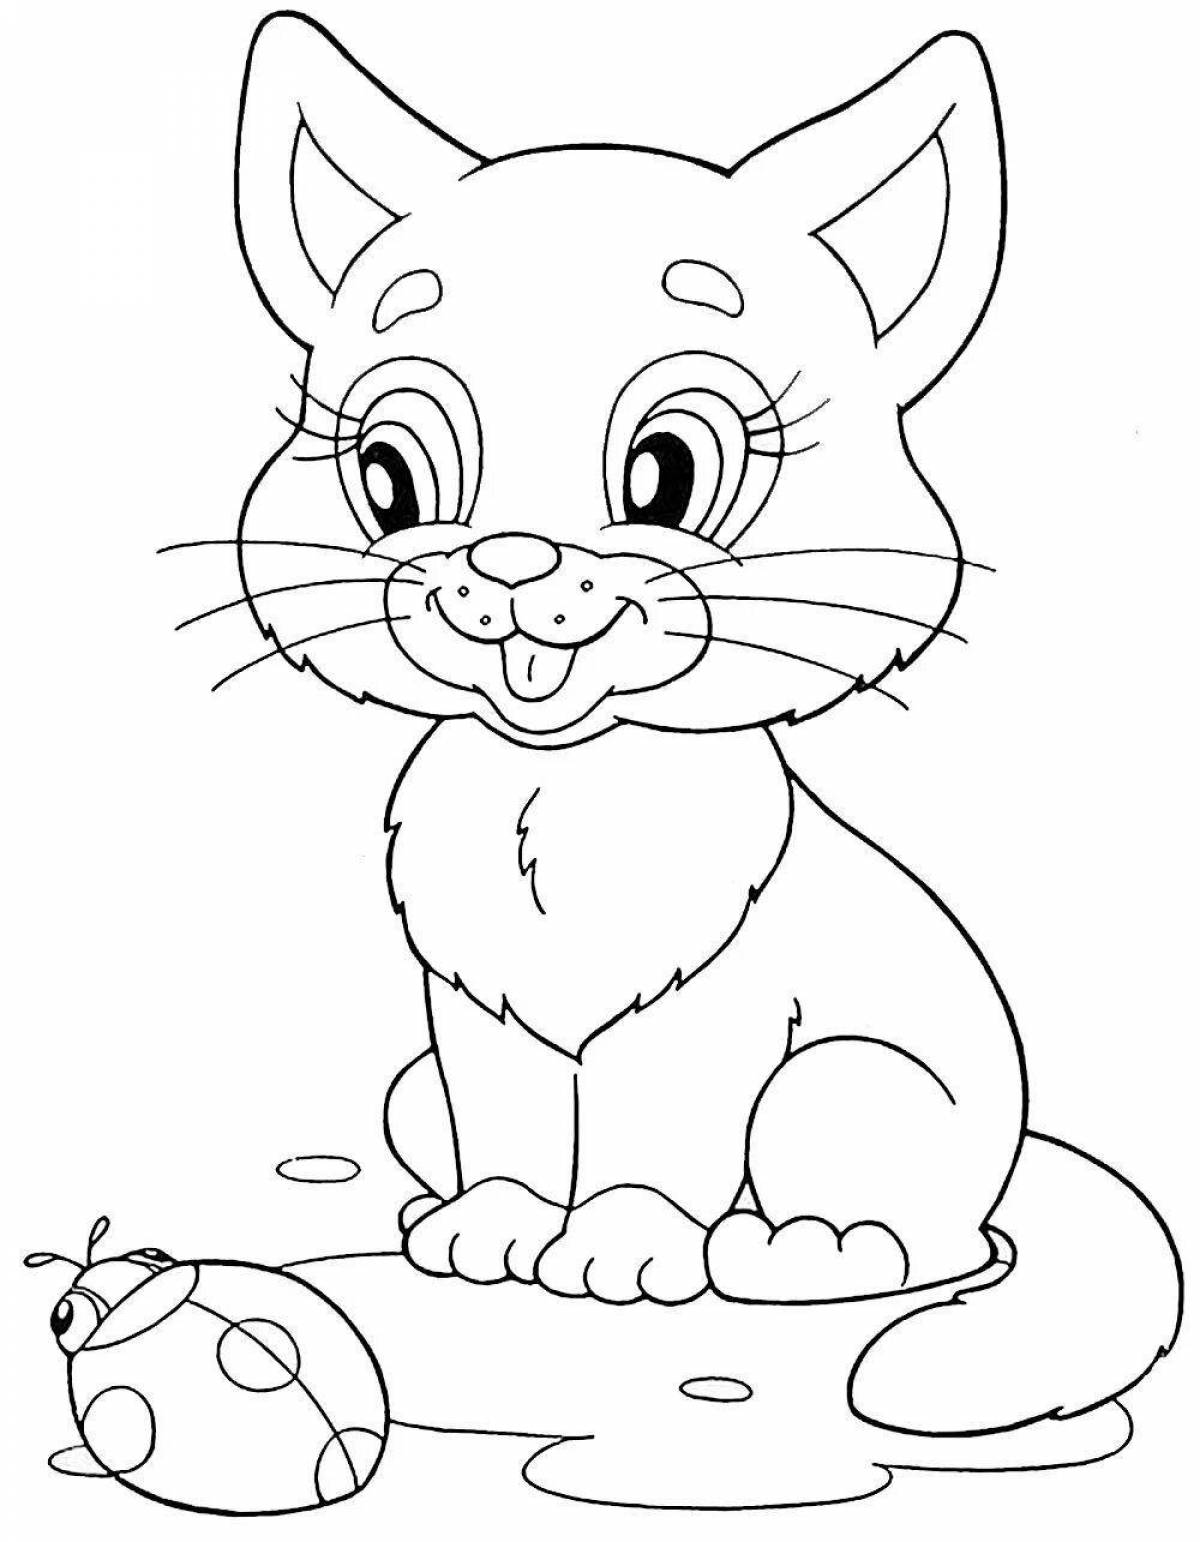 Joyful coloring for kids with animals